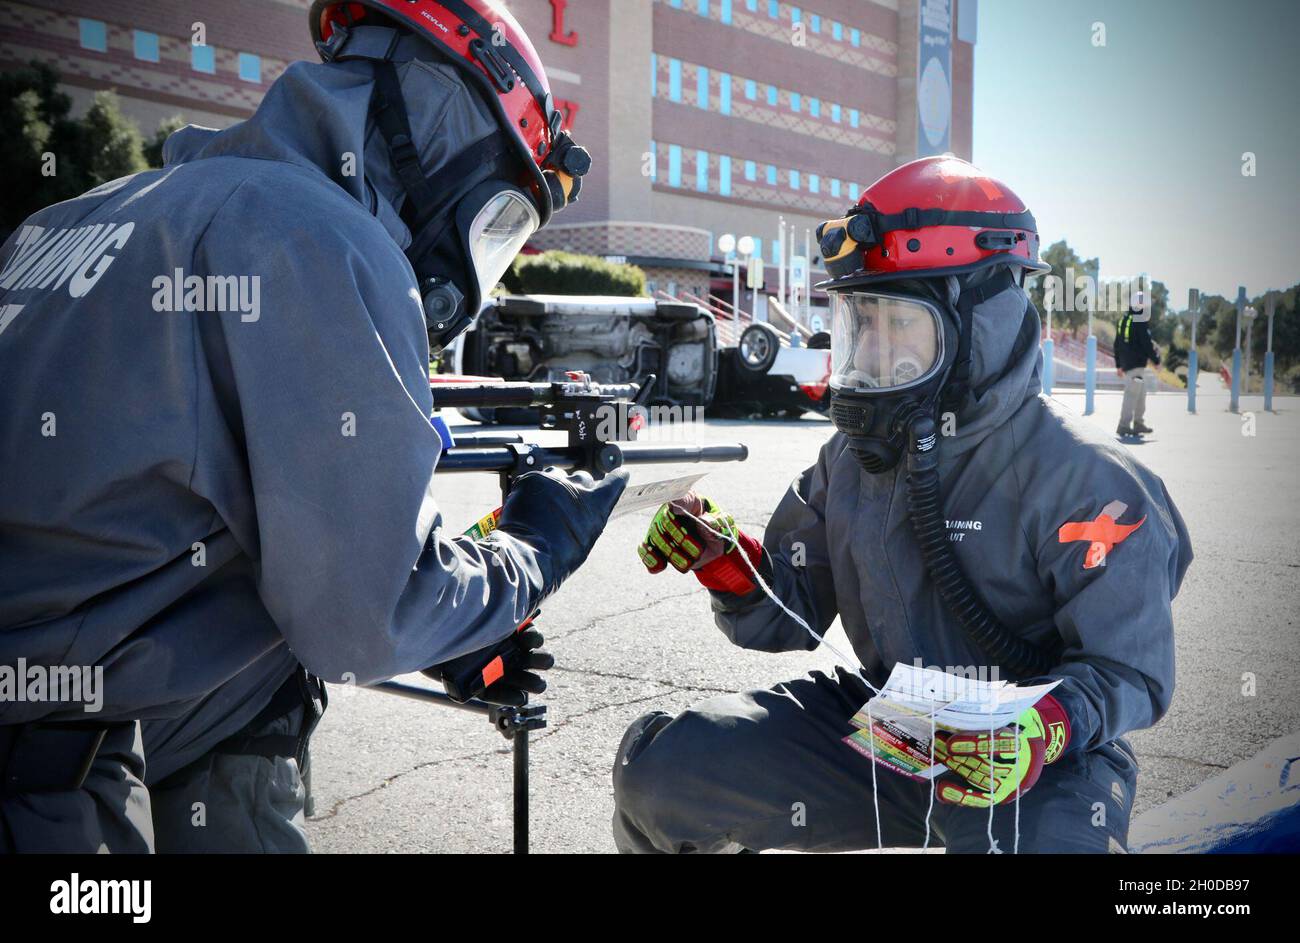 Soldiers from the 409th Engineer Company, Task Force 76, 76th Operational Response Command, check their gear prior to a search and rescue mission during a Chemical, Biological, Radiological and Nuclear (CBRN) disaster response mass casualty decontamination exercise at the Sam Boyd Stadium in Las Vegas, Nevada, Jan. 30. The exercise involves approximately 200 Army Reserve Soldiers as well as local civilian agencies such as the Las Vegas and Henderson Fire Departments. The Soldiers from Task Force 76 specialize in search and rescue, chemical decontamination and medical treatment operations. Stock Photo